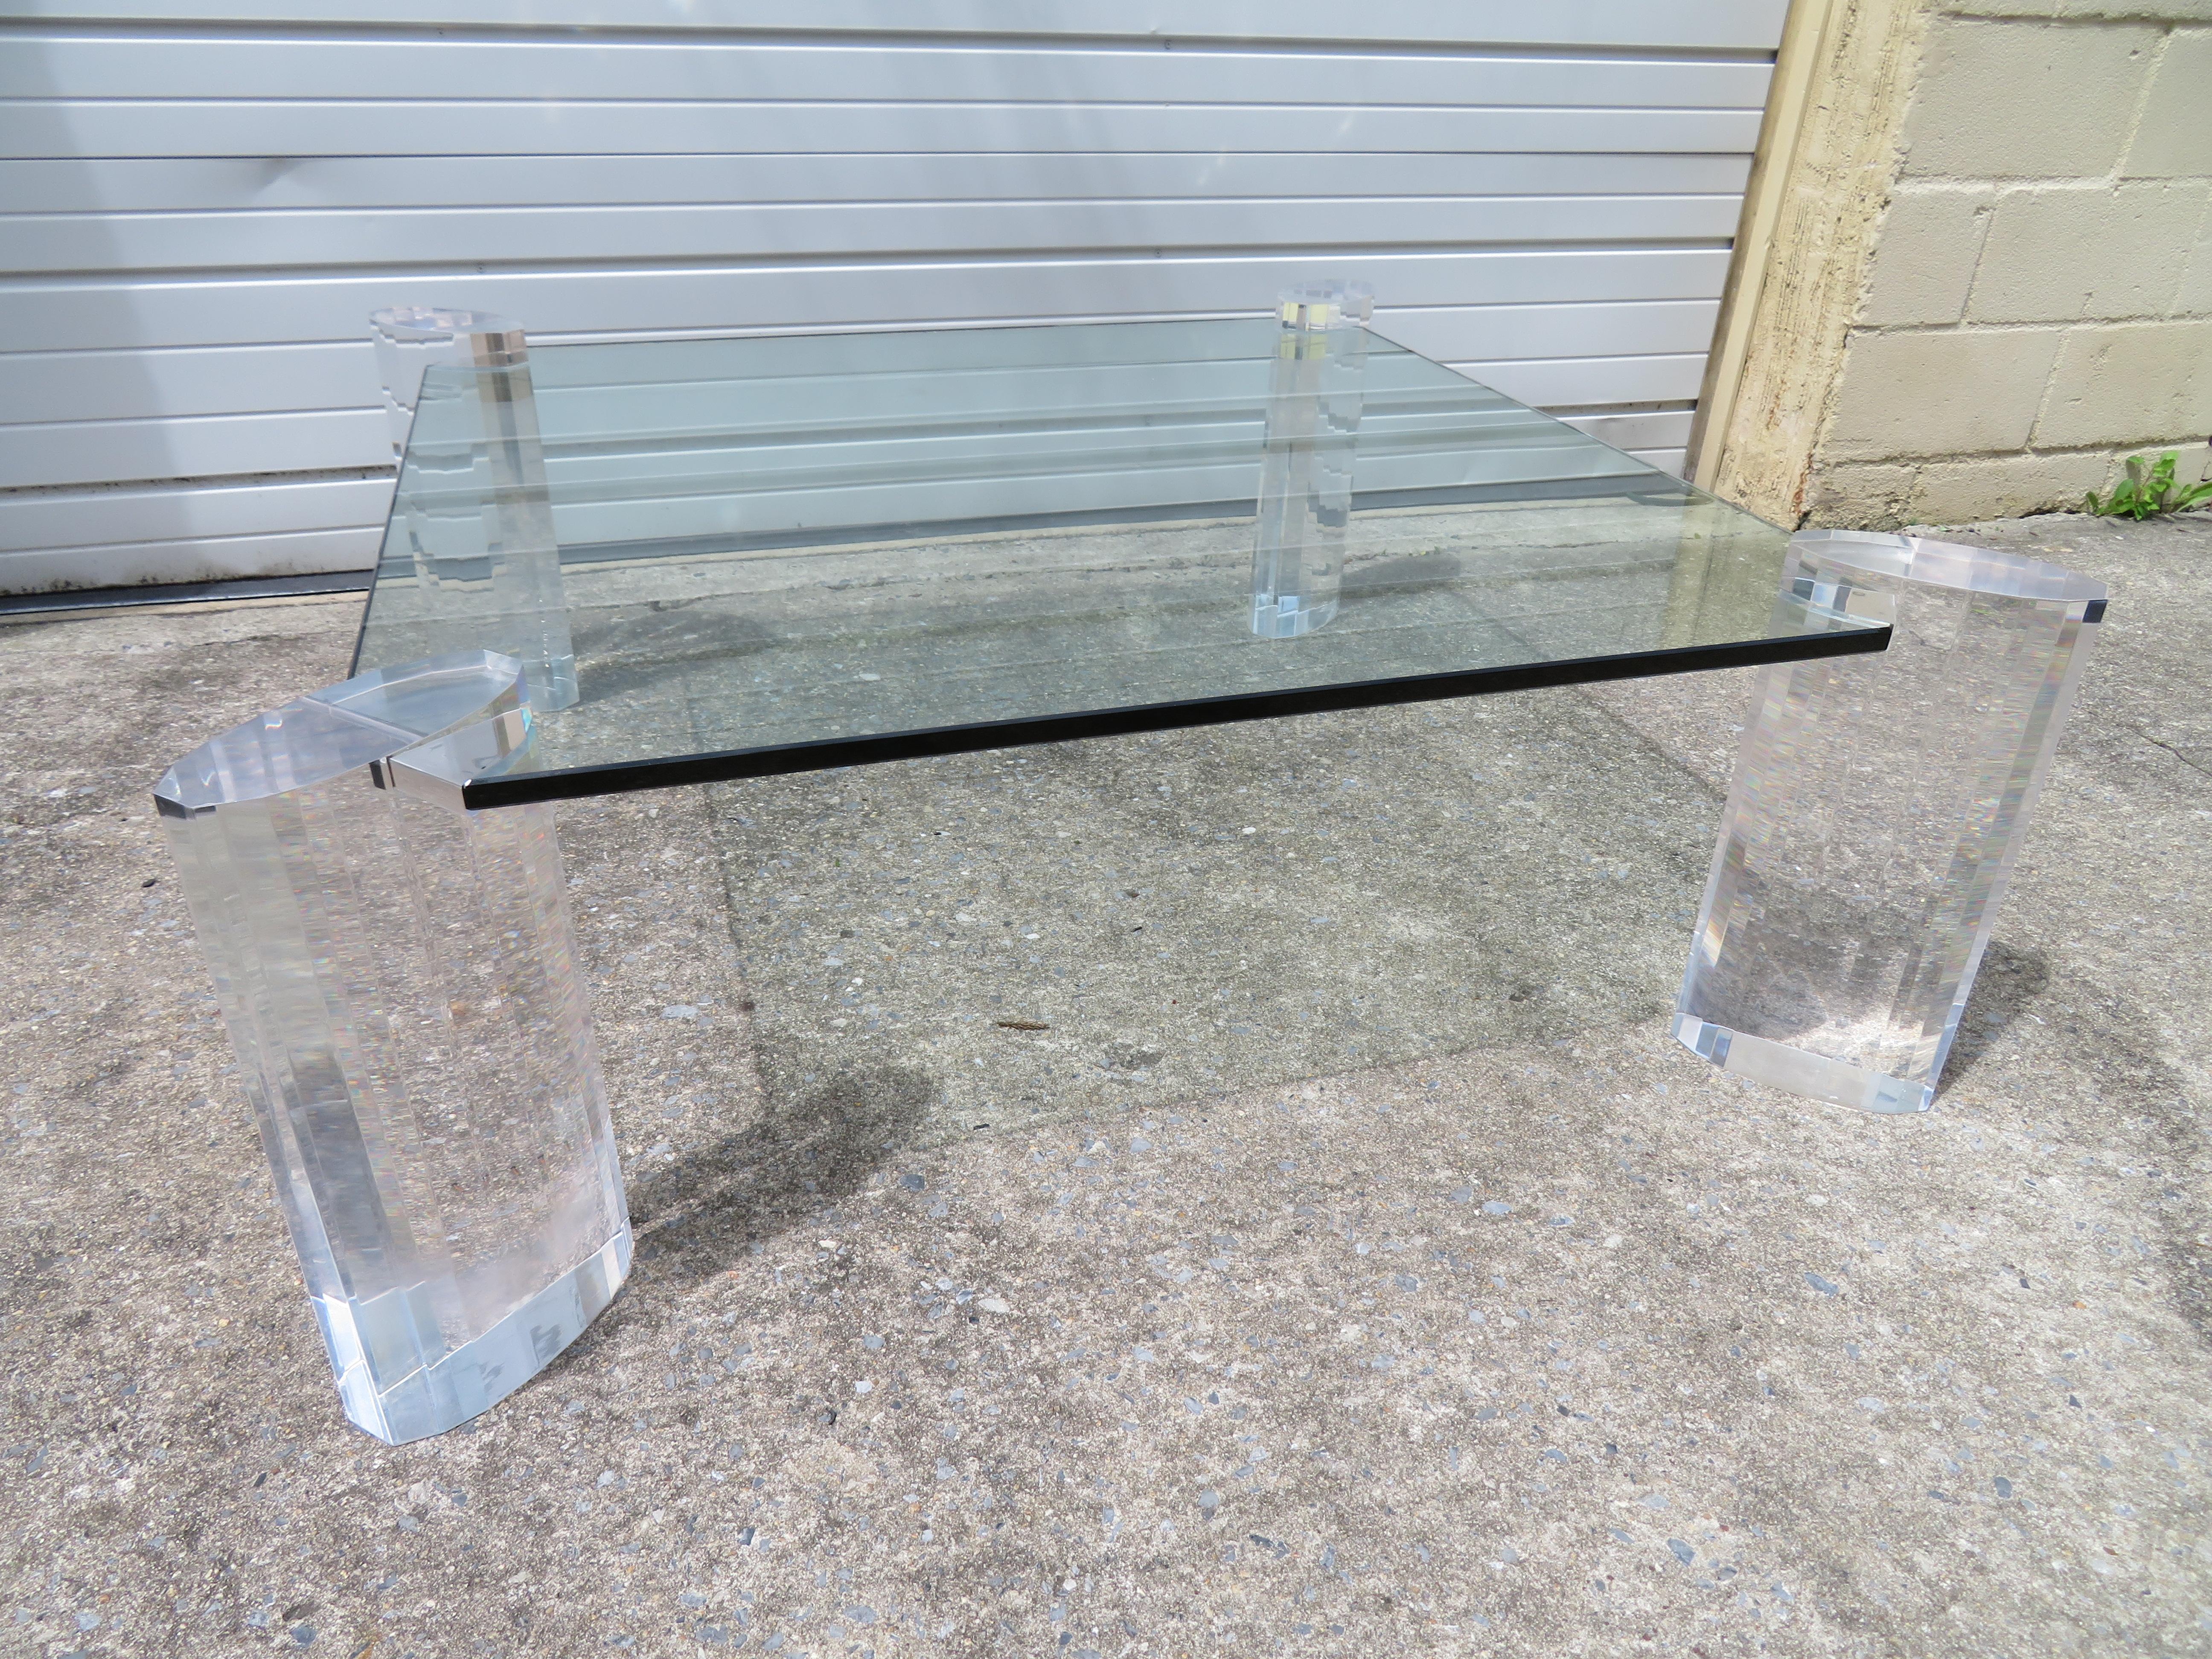 Magnificent Karl Springer style faceted Lucite pillar coffee table. This piece looks like an expensive piece of jewelry and is just gorgeous in person. The thick chunky lucite pillars are faceted giving them a brilliant sparkle like diamonds. This